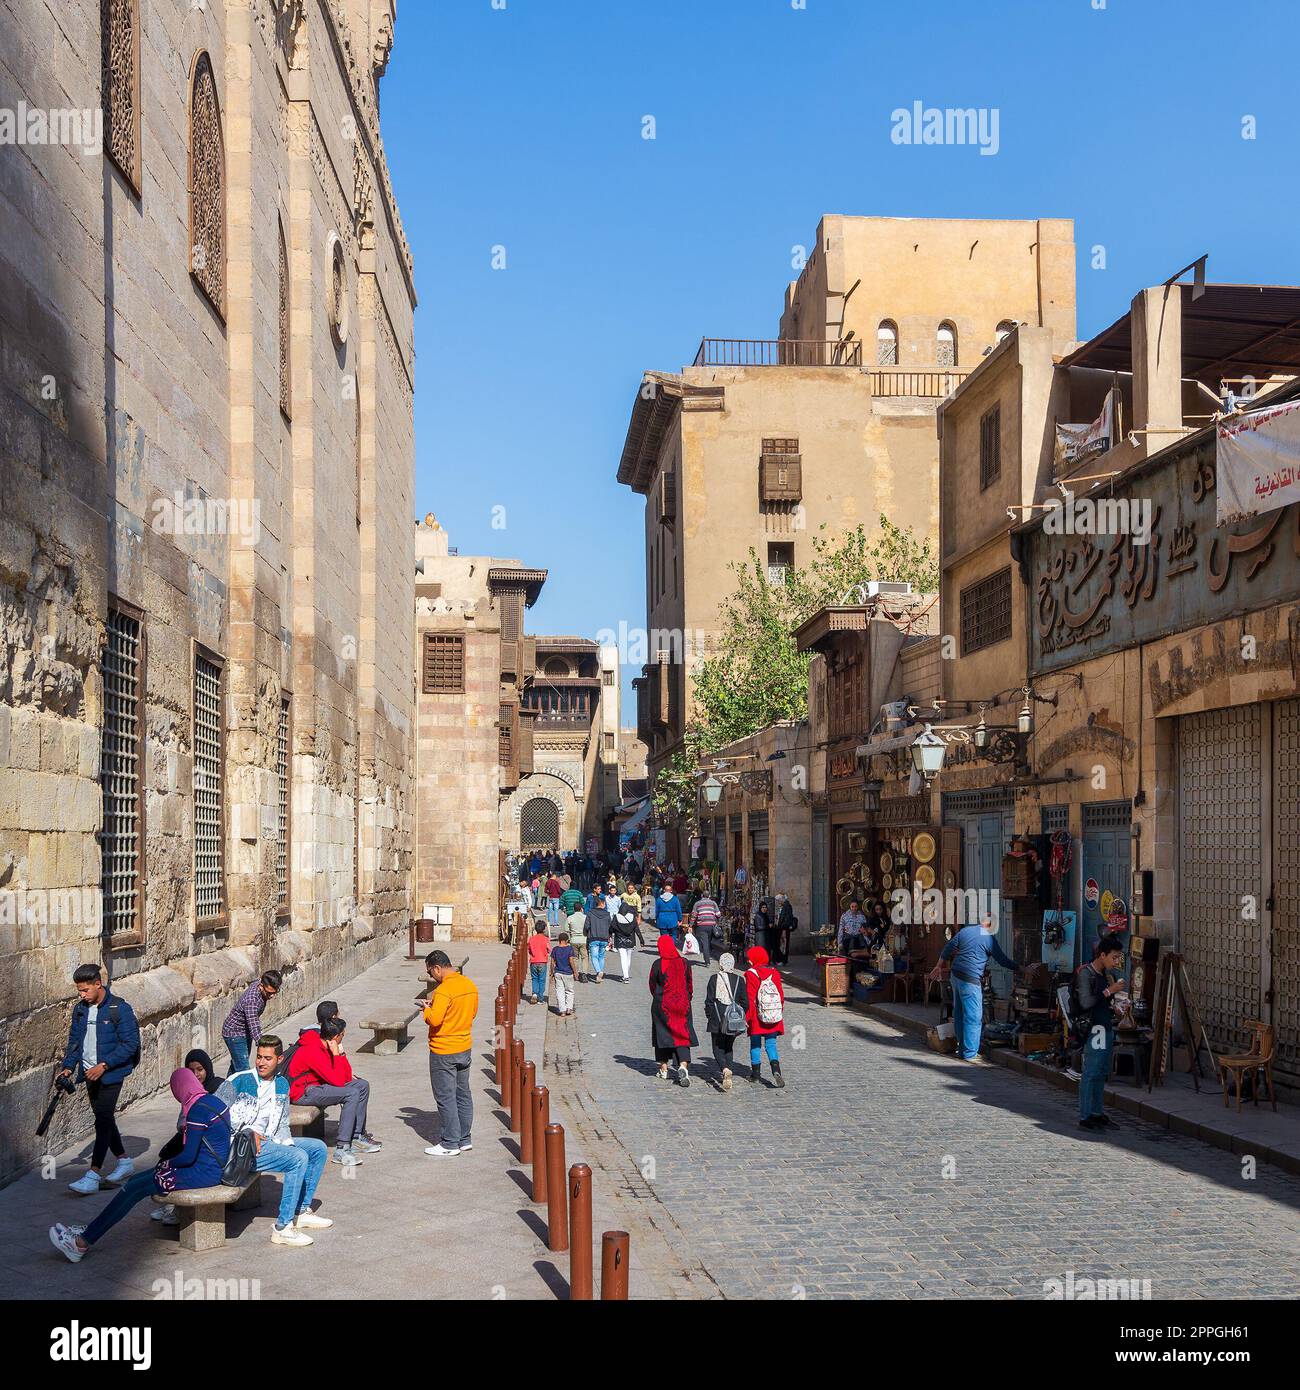 Moez Street with Barquq mosque and Sabil of Katkhuda historic building at far end, Cairo, Egypt Stock Photo